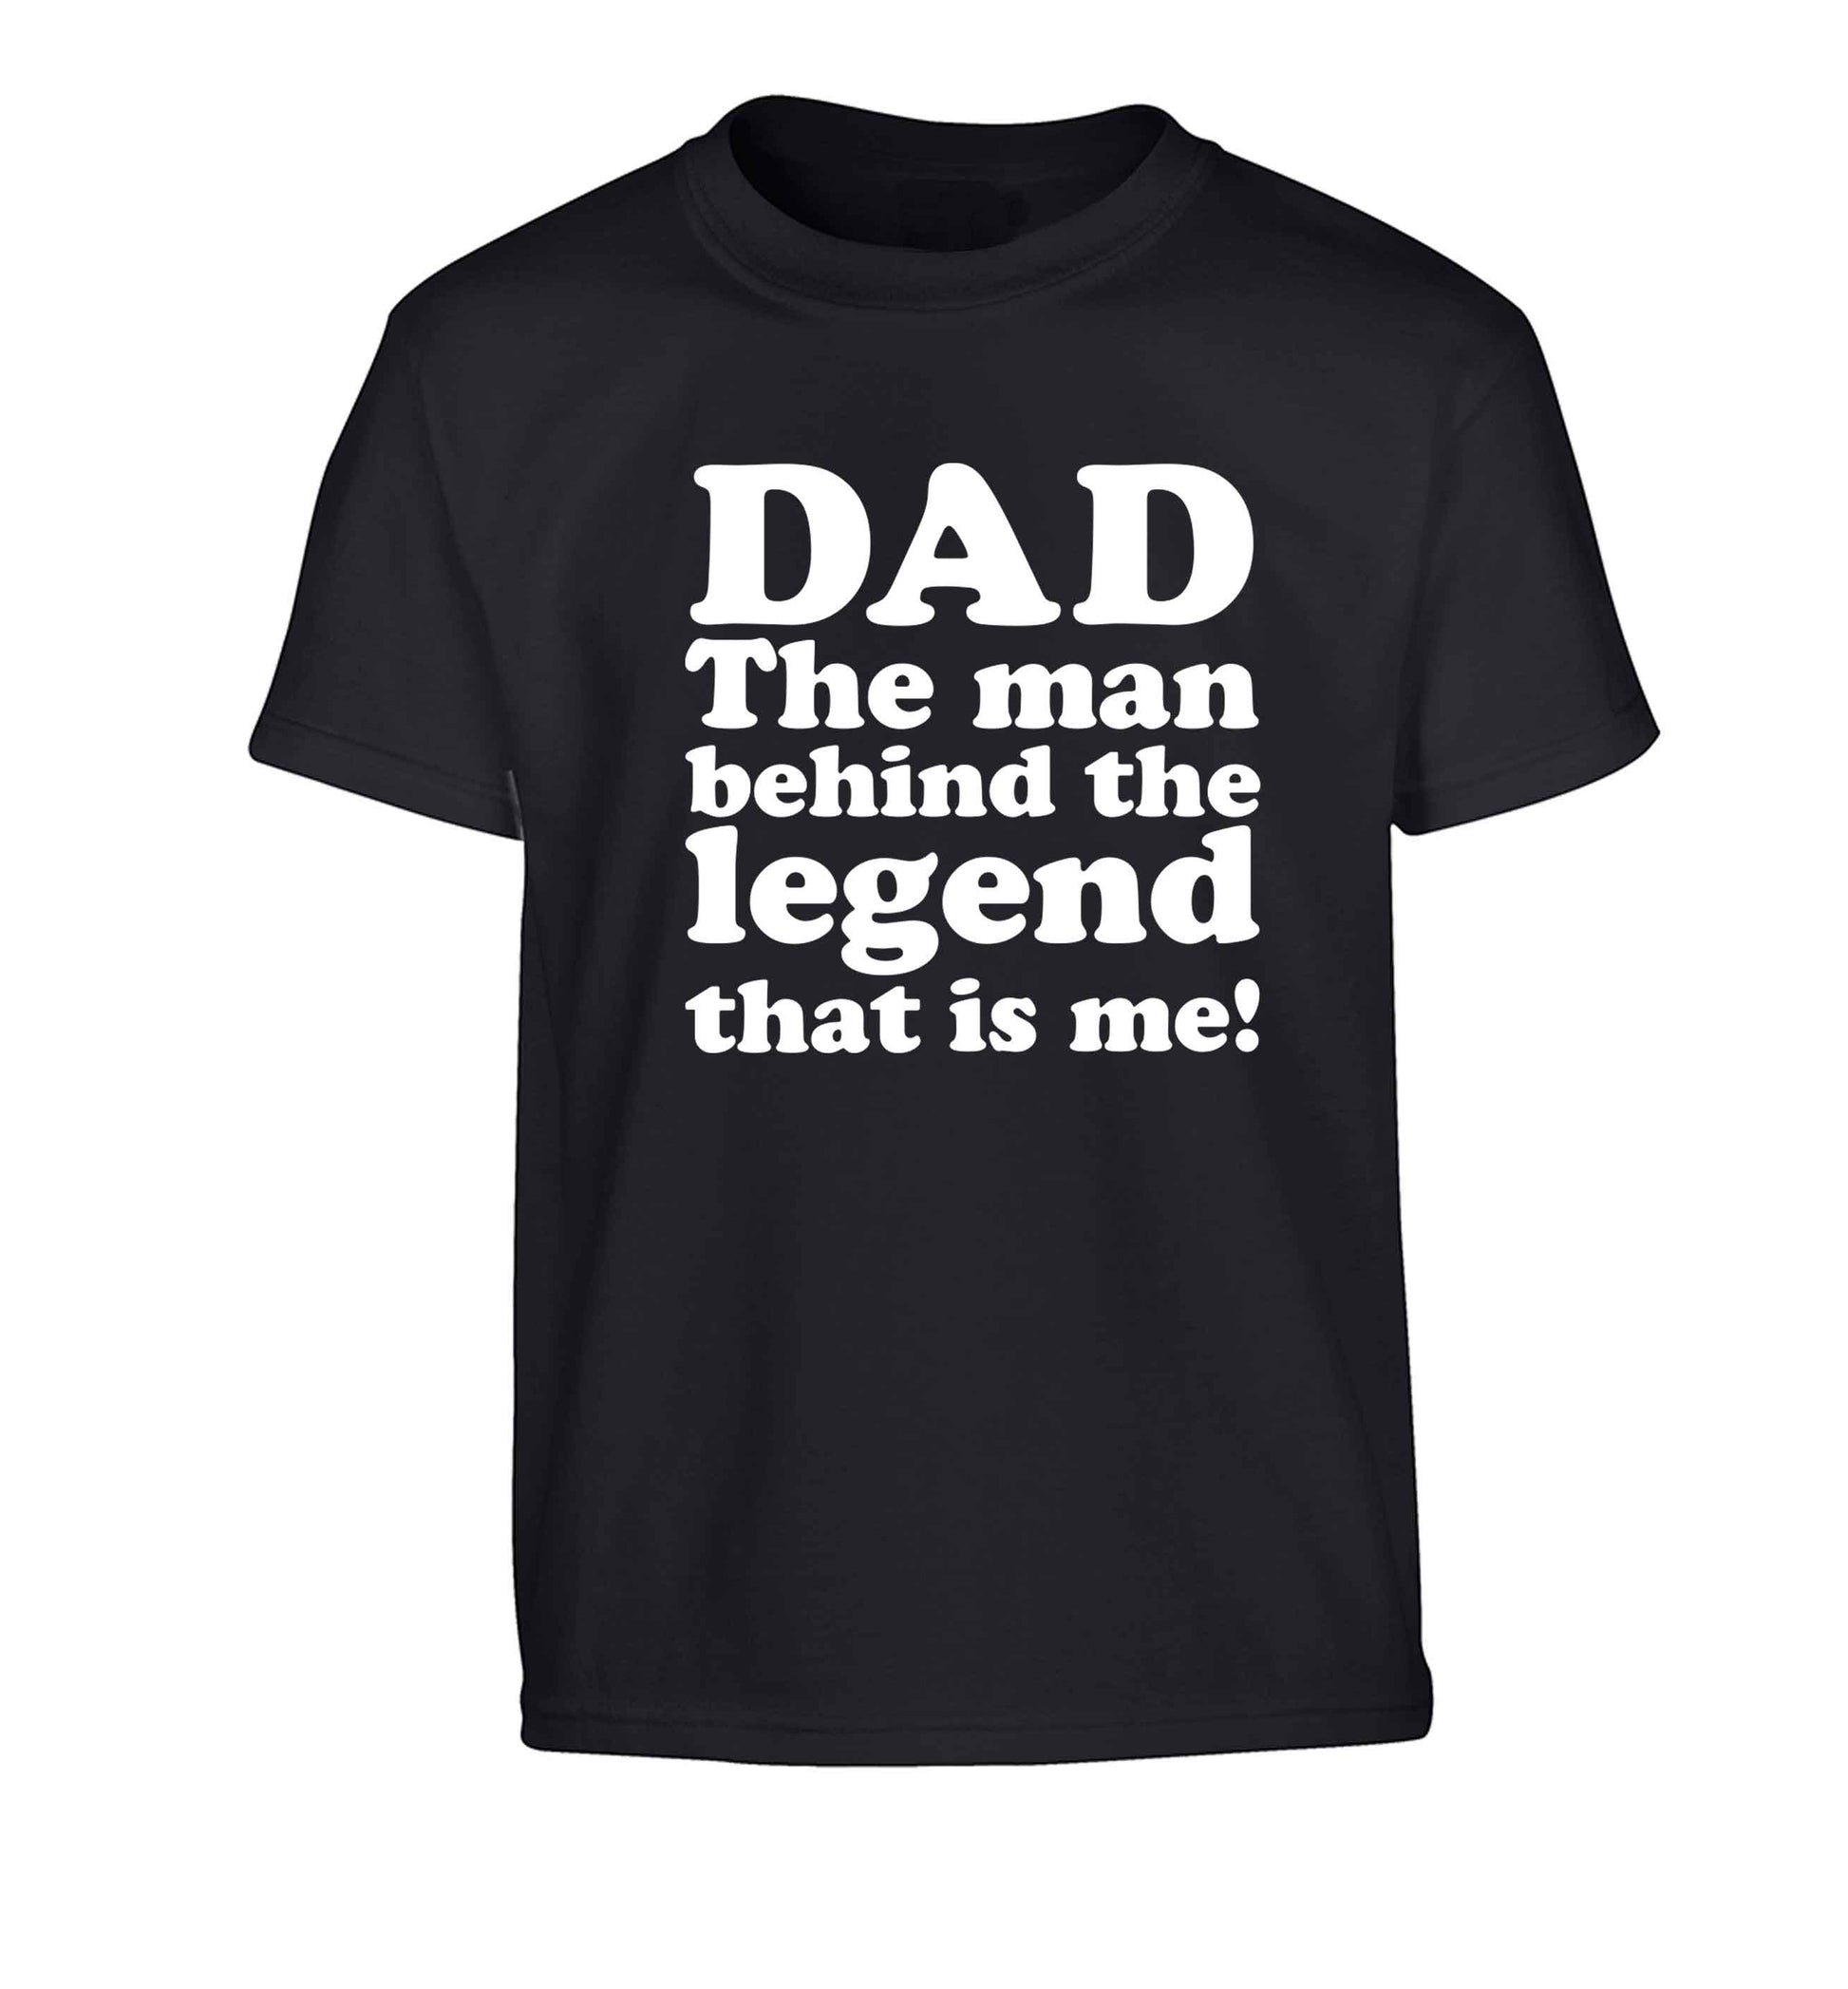 Dad the man behind the legend that is me Children's black Tshirt 12-13 Years